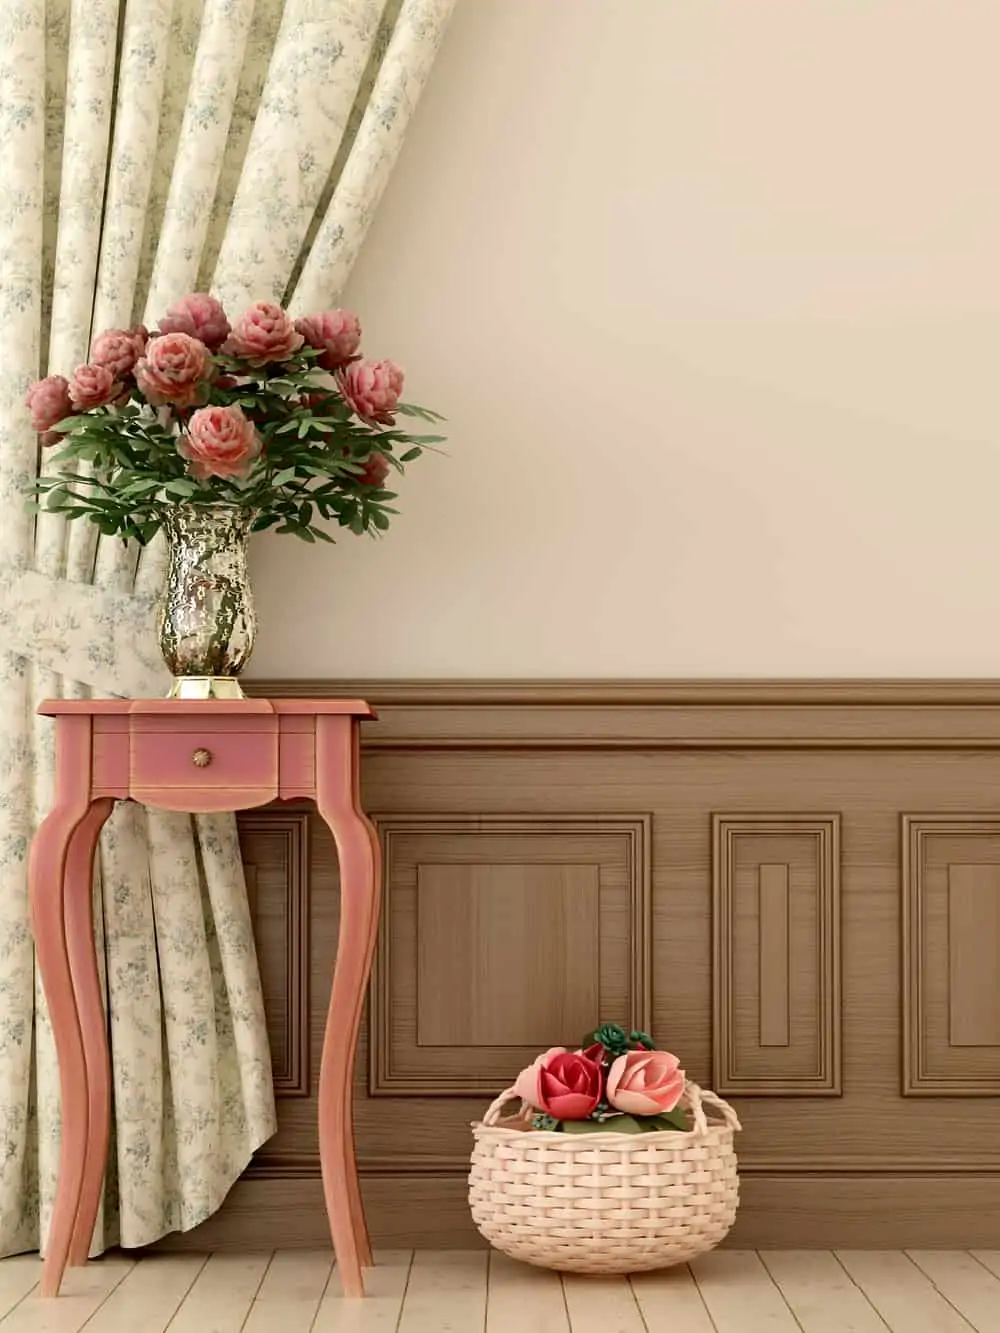 Composition in the style of Provence, consisting of antique pink console and flowers against of curtains and beige walls